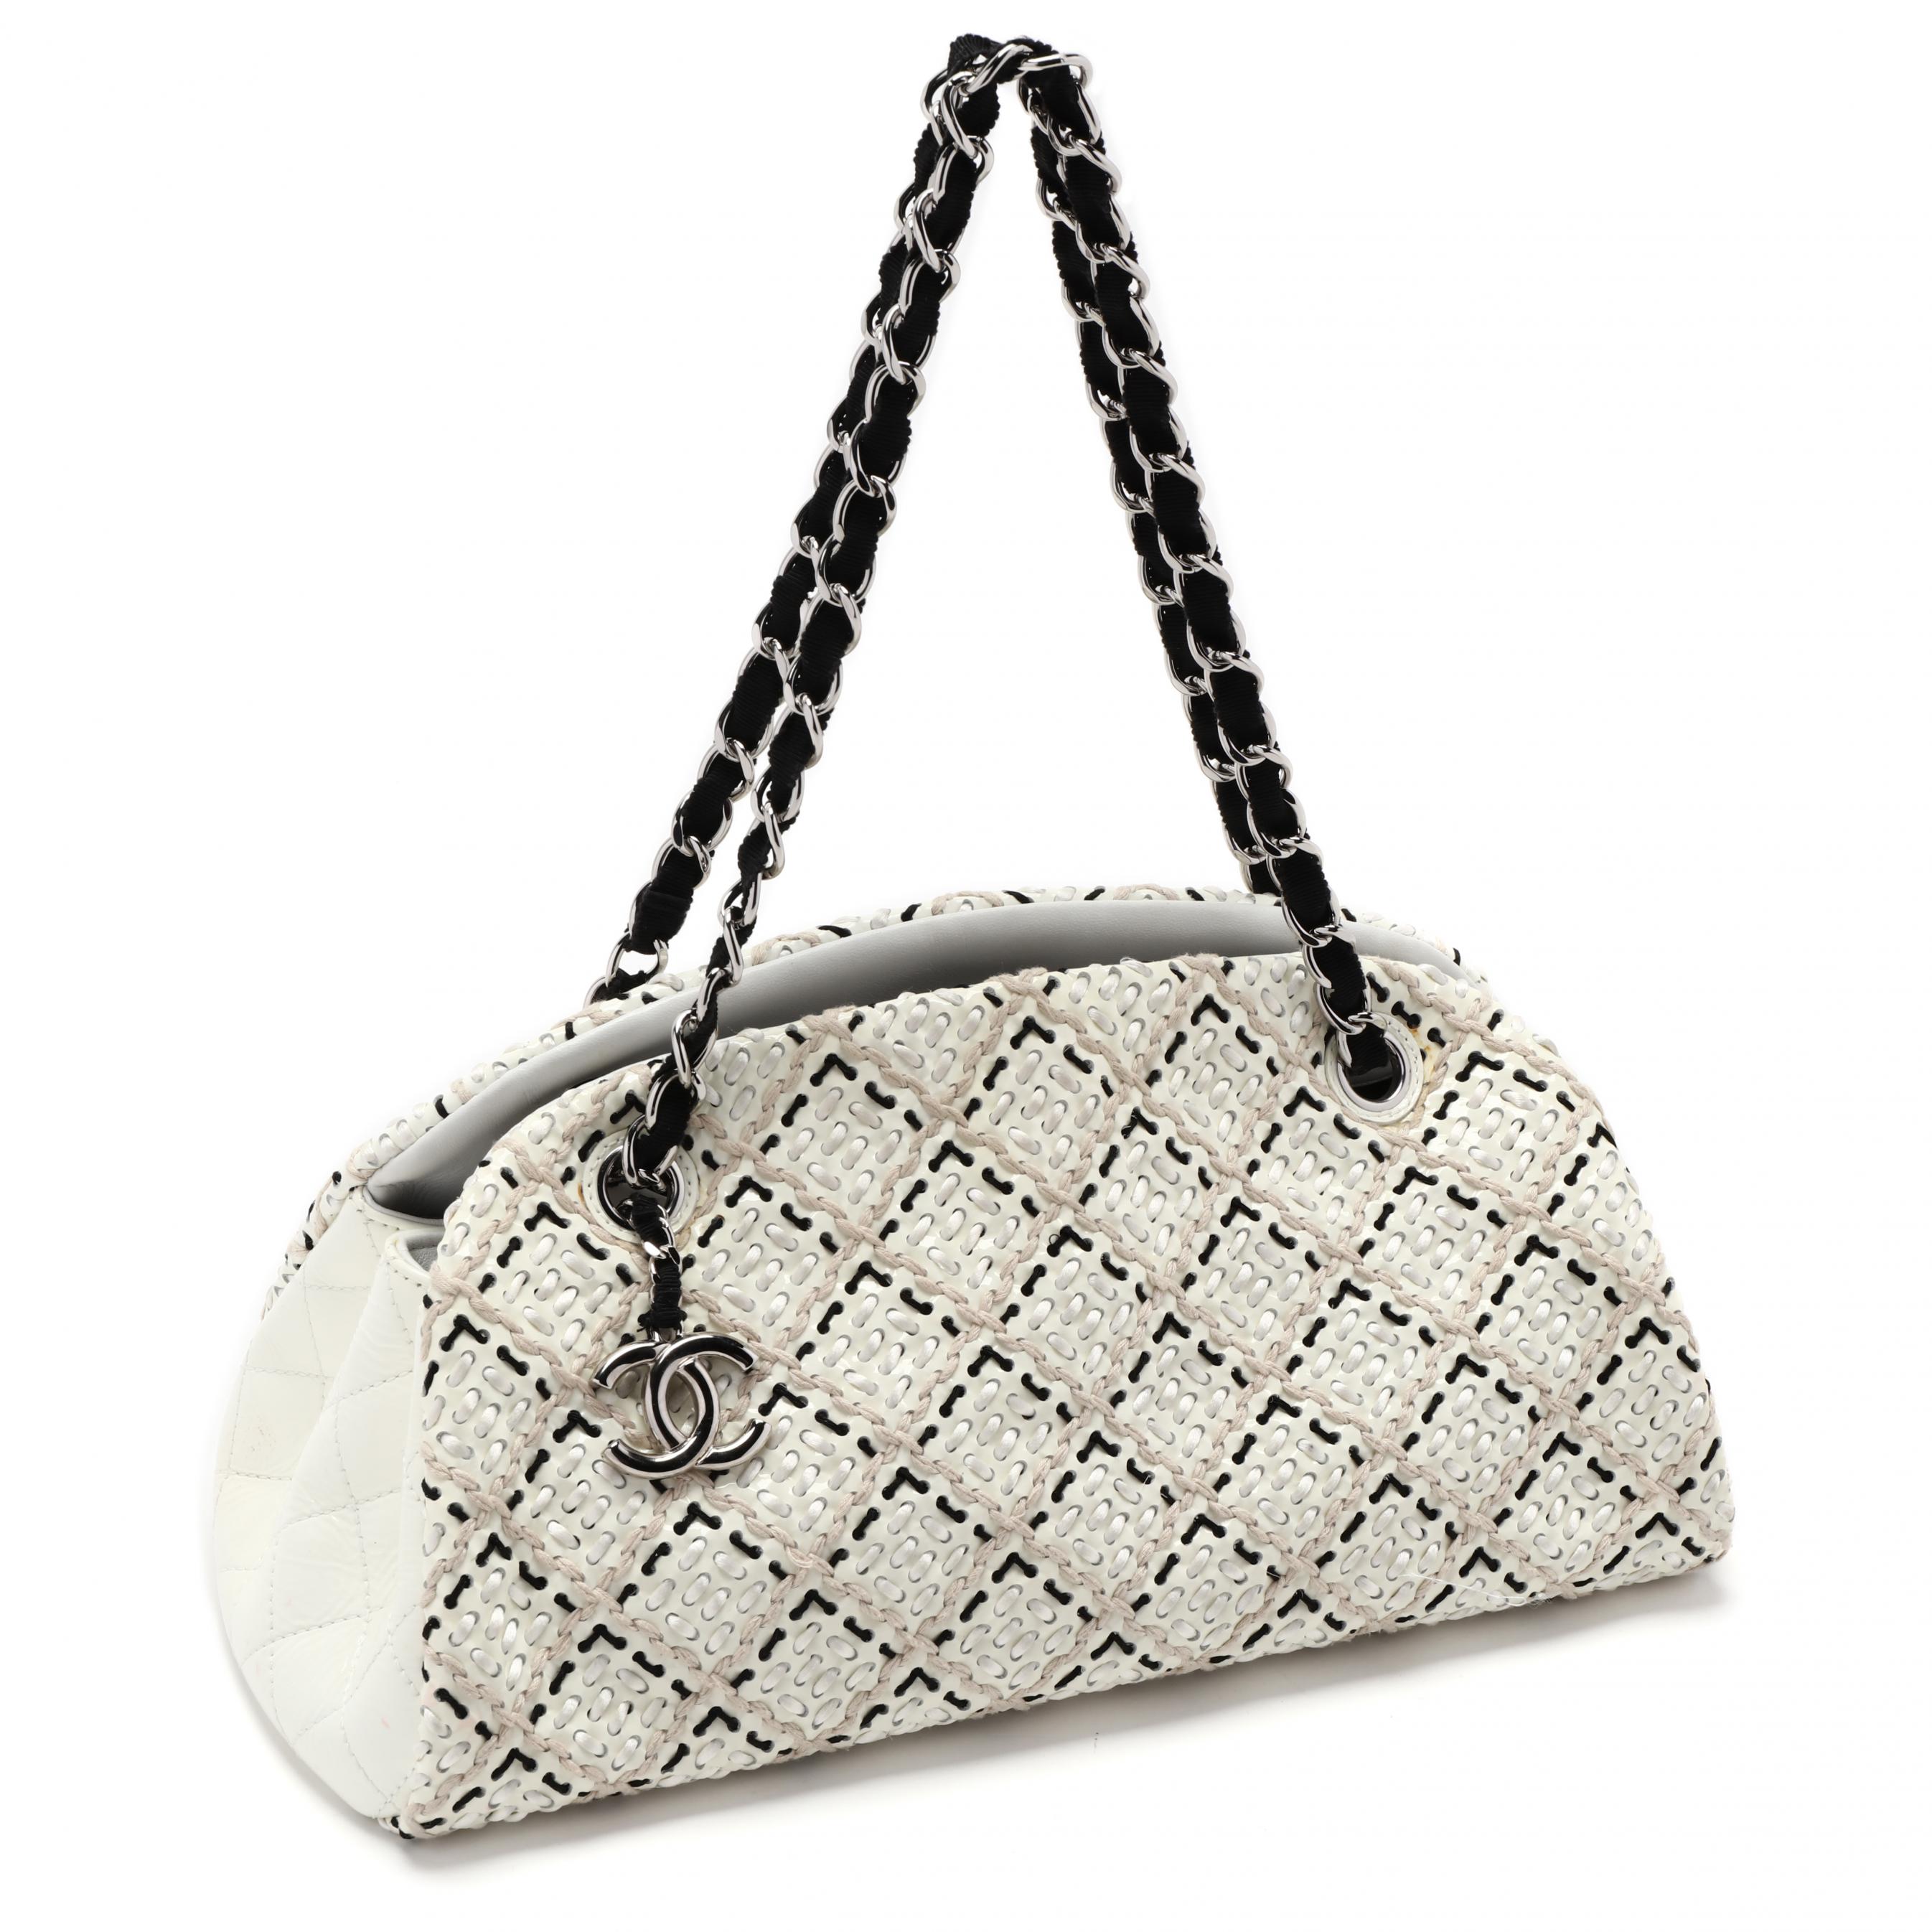 Chanel Small Stitch Just Mademoiselle Bowling Bag - Neutrals